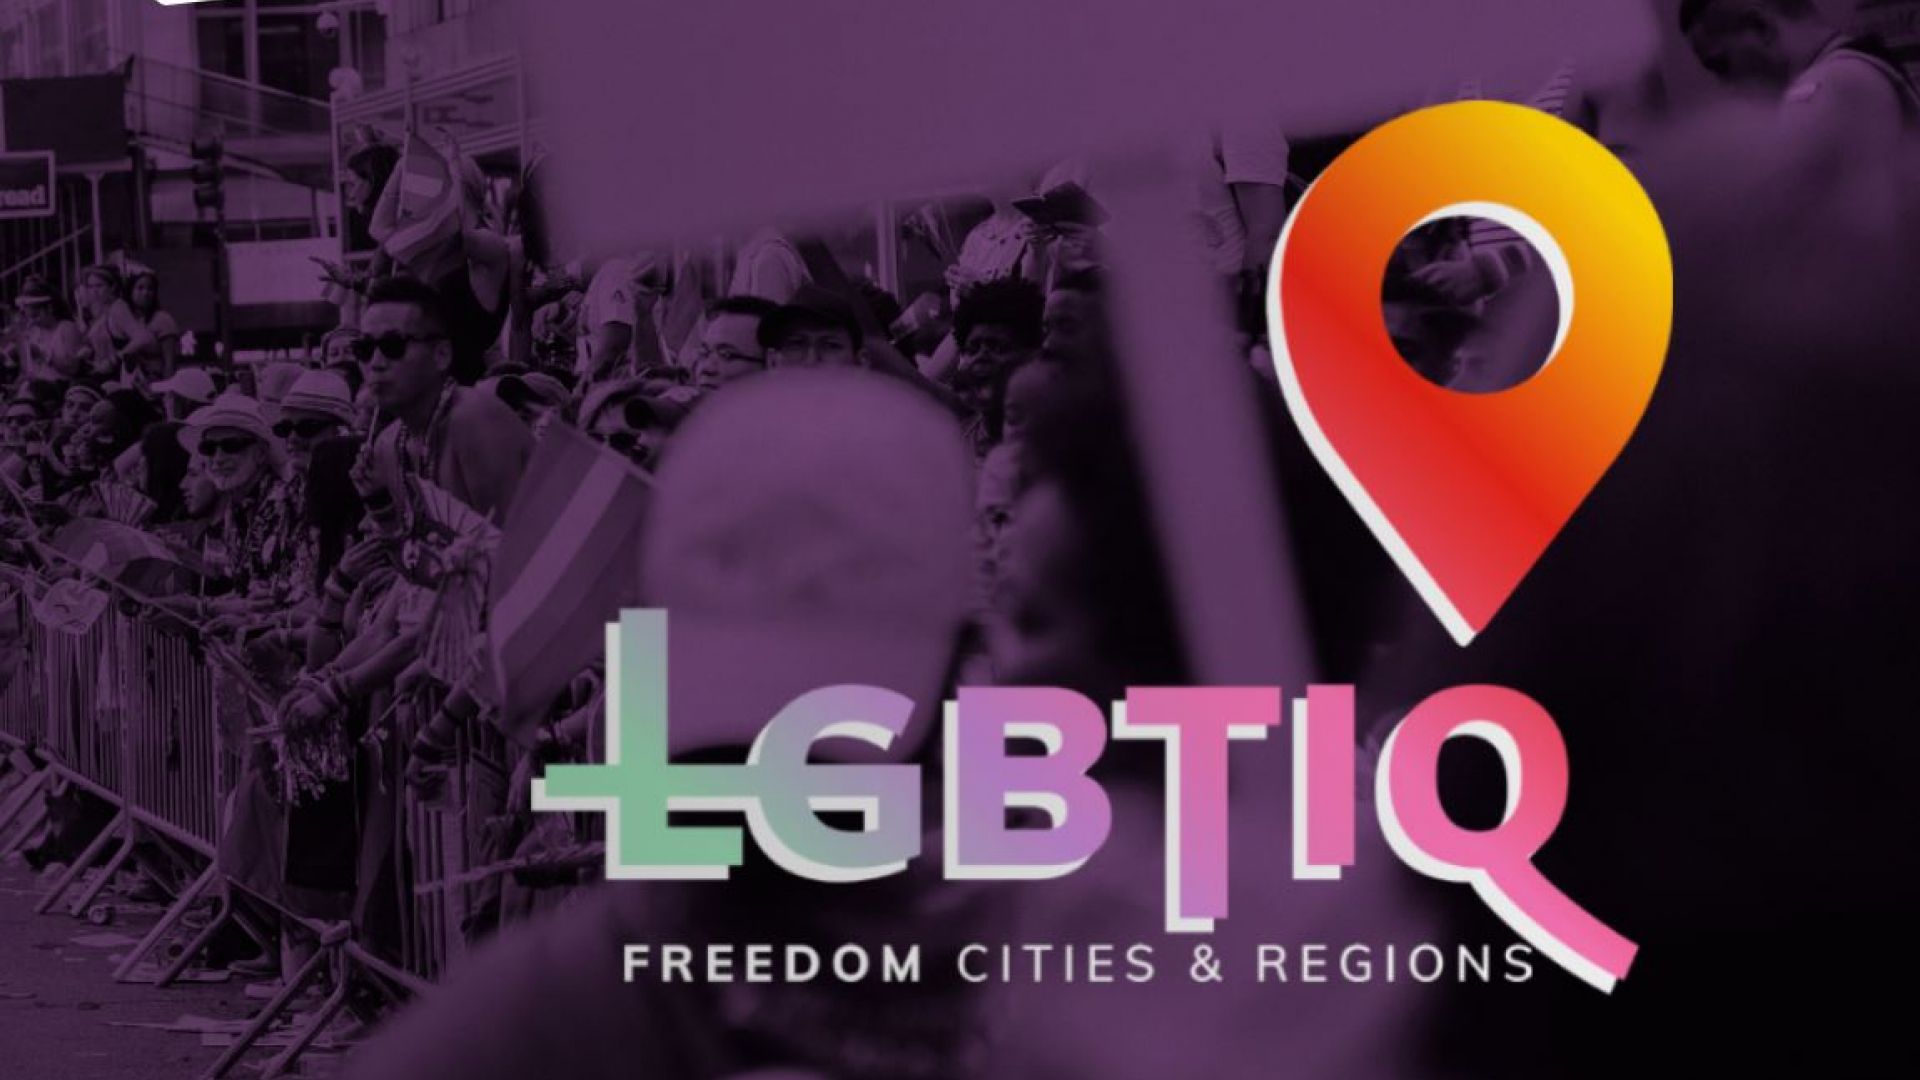 PES COR: #LoveWhereILive - Progressives for LGBTIQ Freedom Cities and Regions